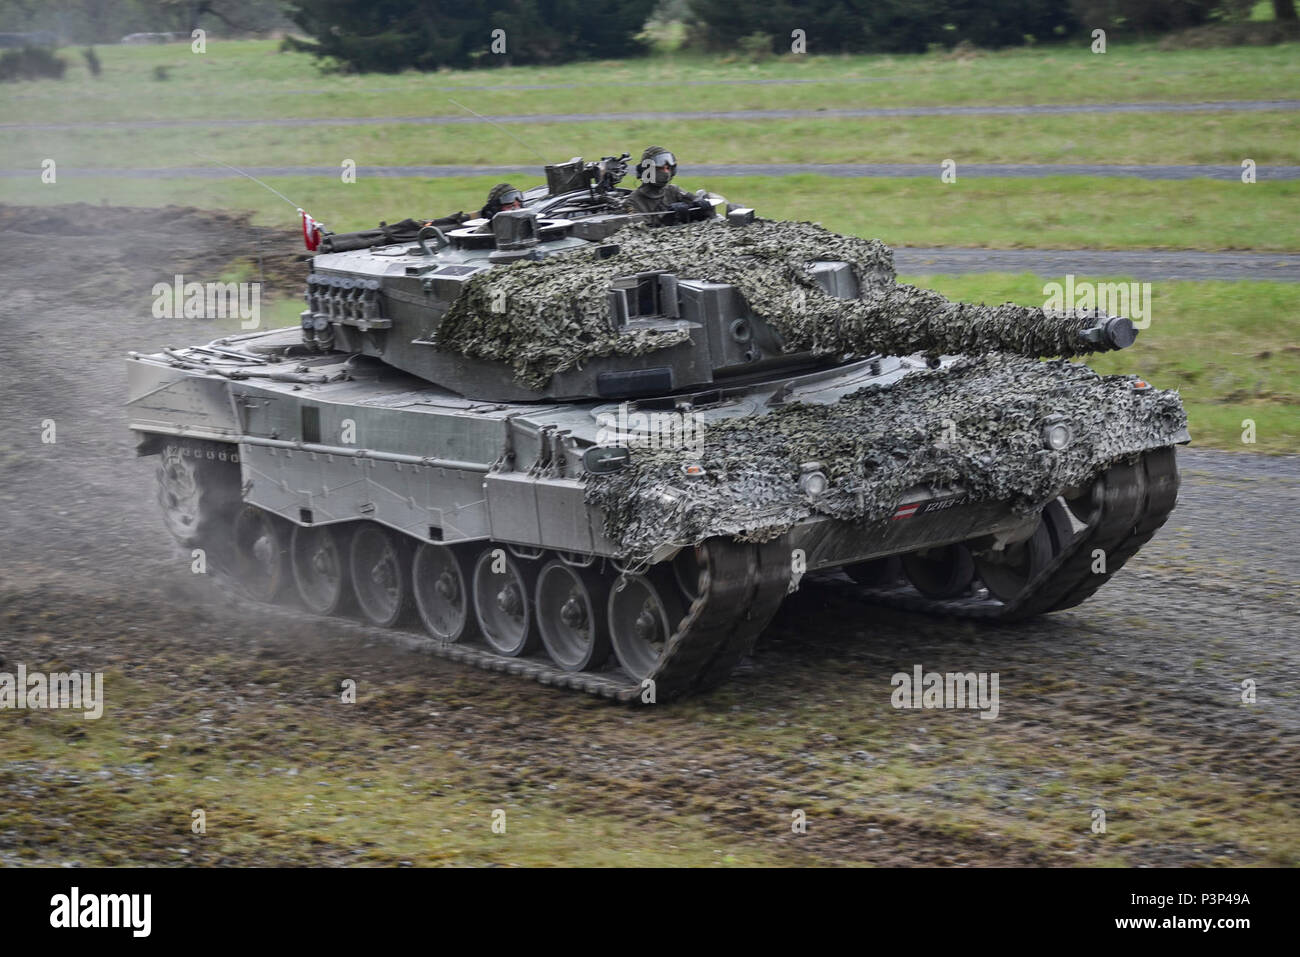 An Austrian Leopard 2A4 tank, belonging to the Bundesheer platoon, maneuvers through obstacles and terrain as part of the precision driving lane, during the Strong Europe Tank Challenge (SETC), at the 7th Army Training Command Grafenwoehr Training Area, Grafenwoehr, Germany, May 8, 2017. The SETC is co-hosted by U.S. Army Europe and the German Army, May 7-12, 2017. The competition is designed to project a dynamic presence, foster military partnership, promote interoperability, and provides an environment for sharing tactics, techniques and procedures, Platoons from six NATO and partner nations Stock Photo